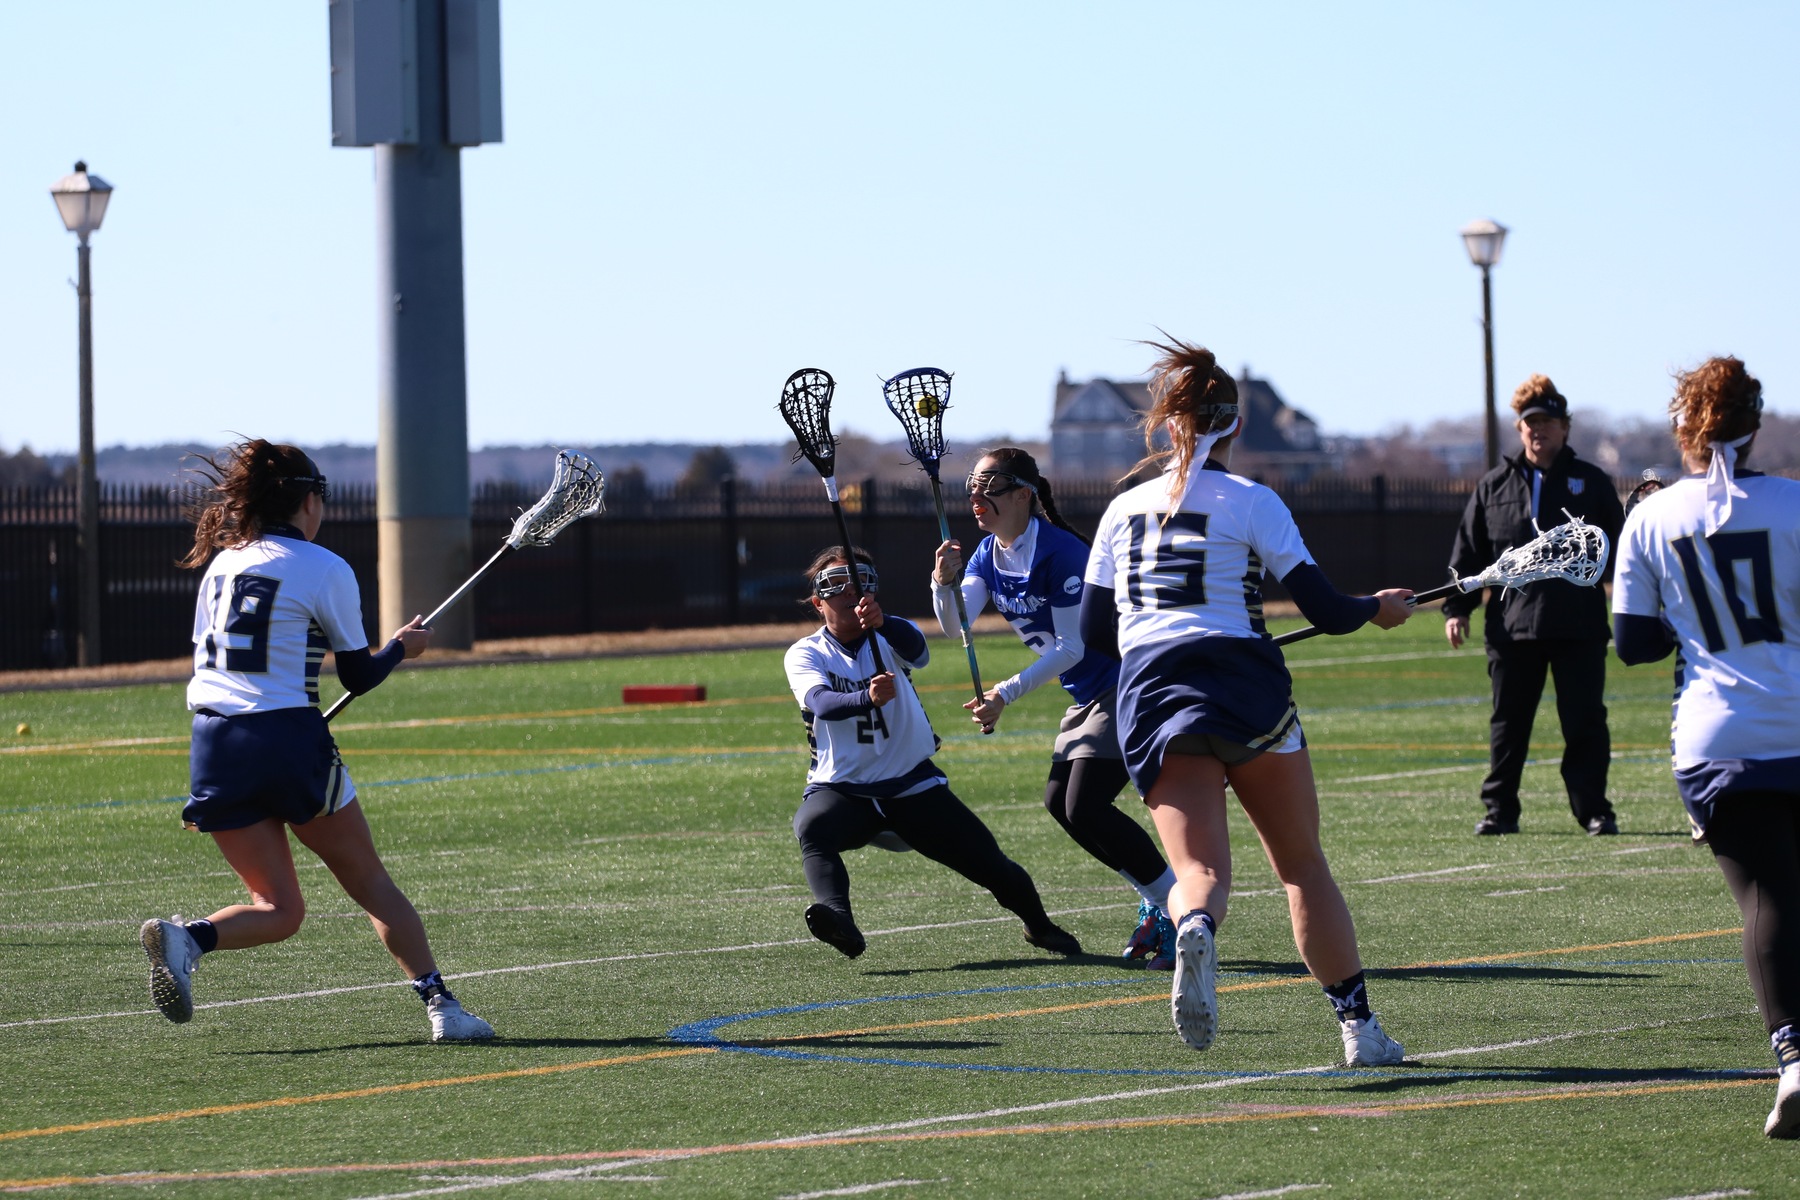 Buccaneer Women’s Lacrosse Earns First Shutout Victory in Program History against Bay Path